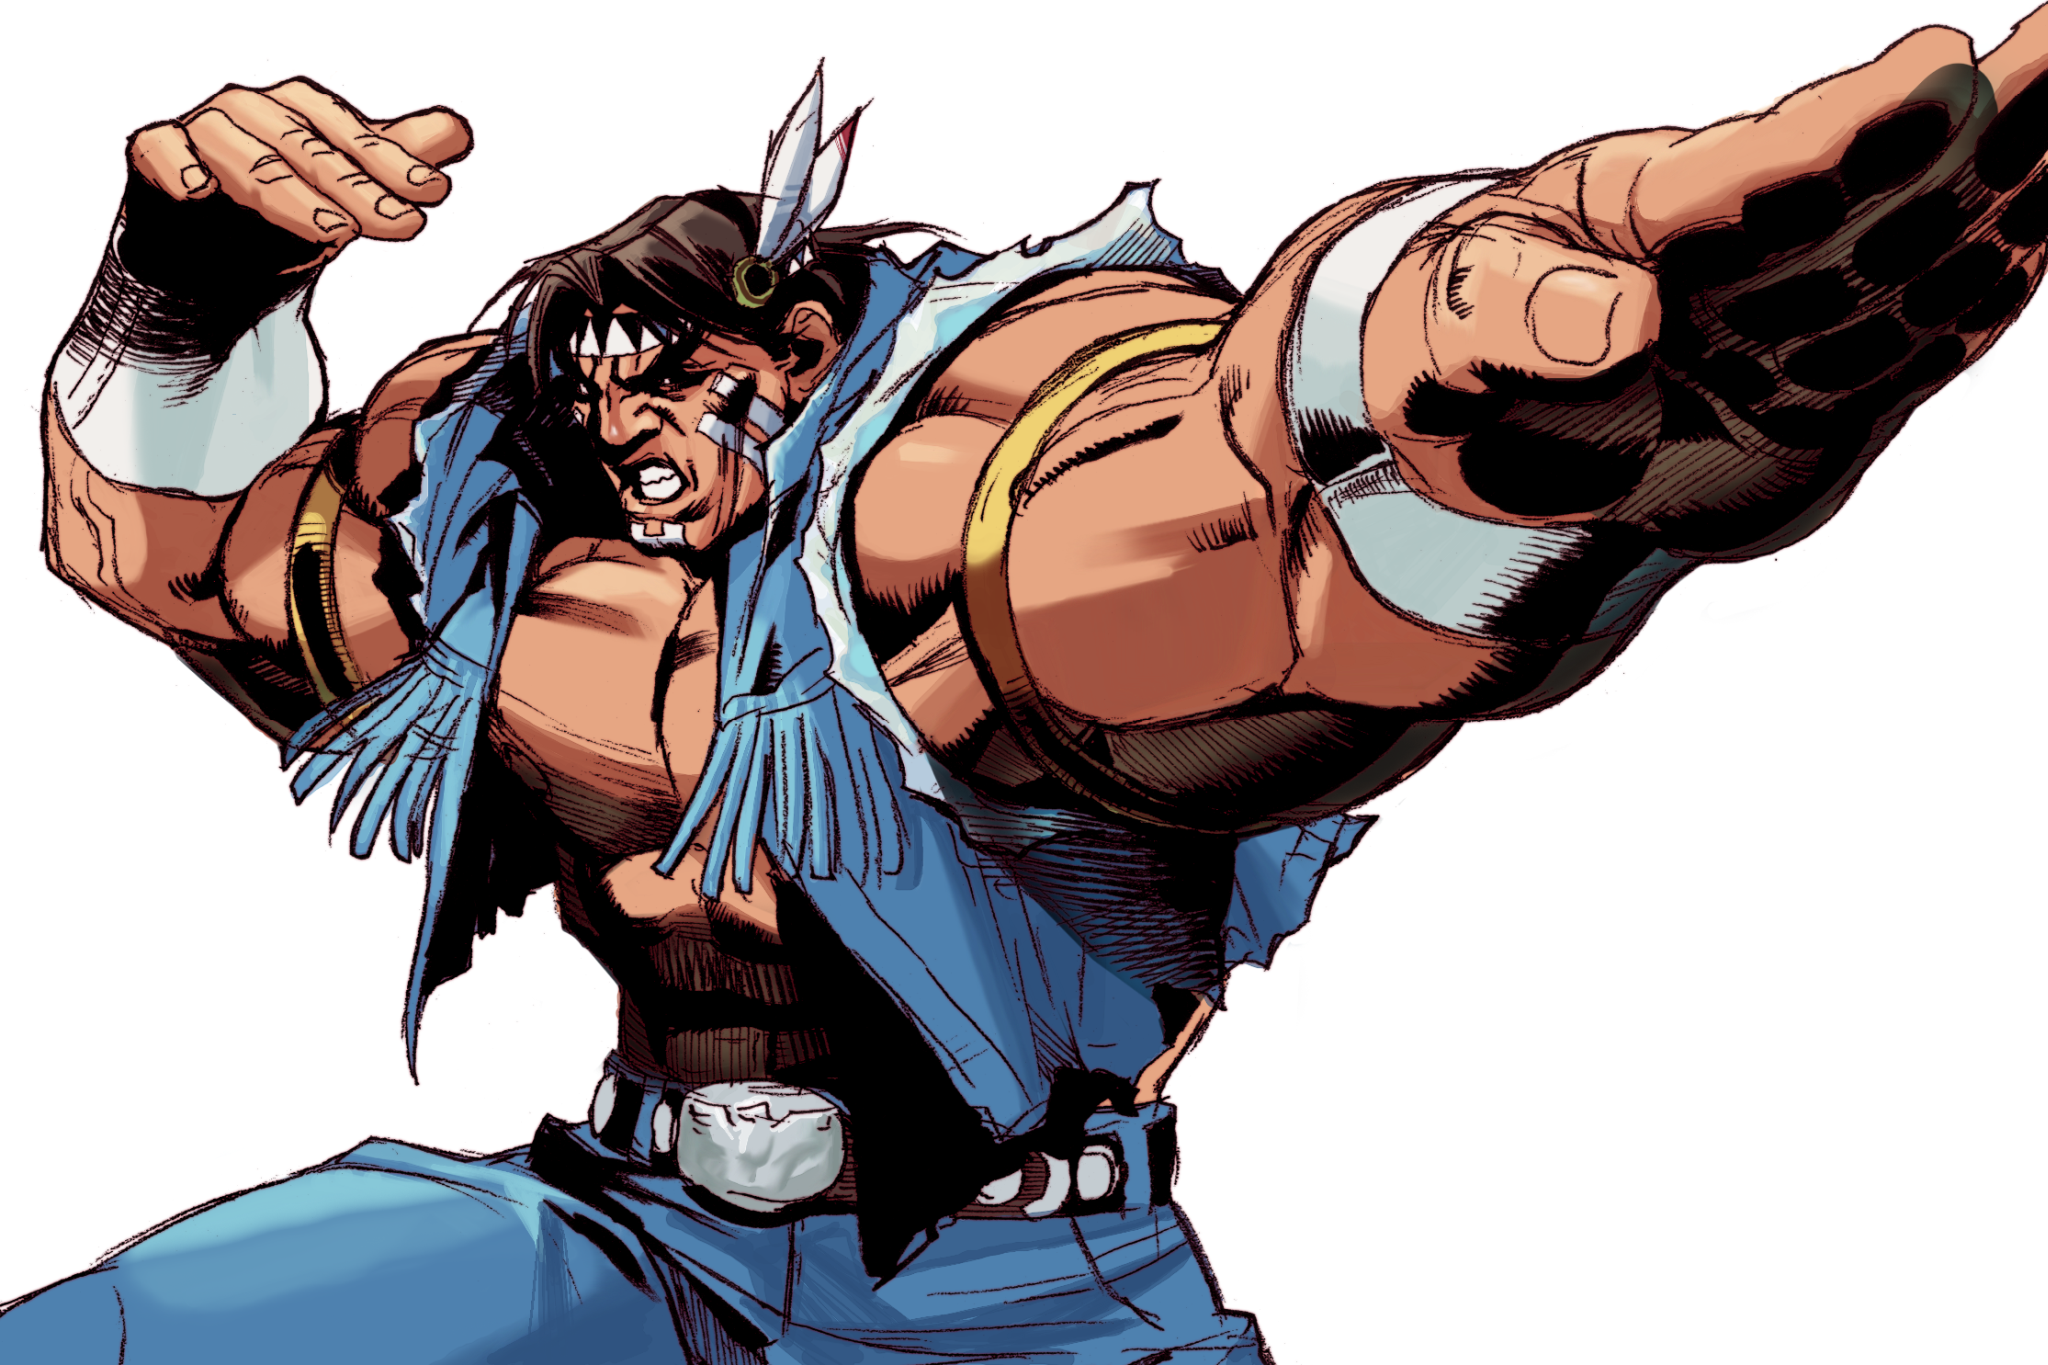 Super Street Fighter II: Turbo Revival Picture